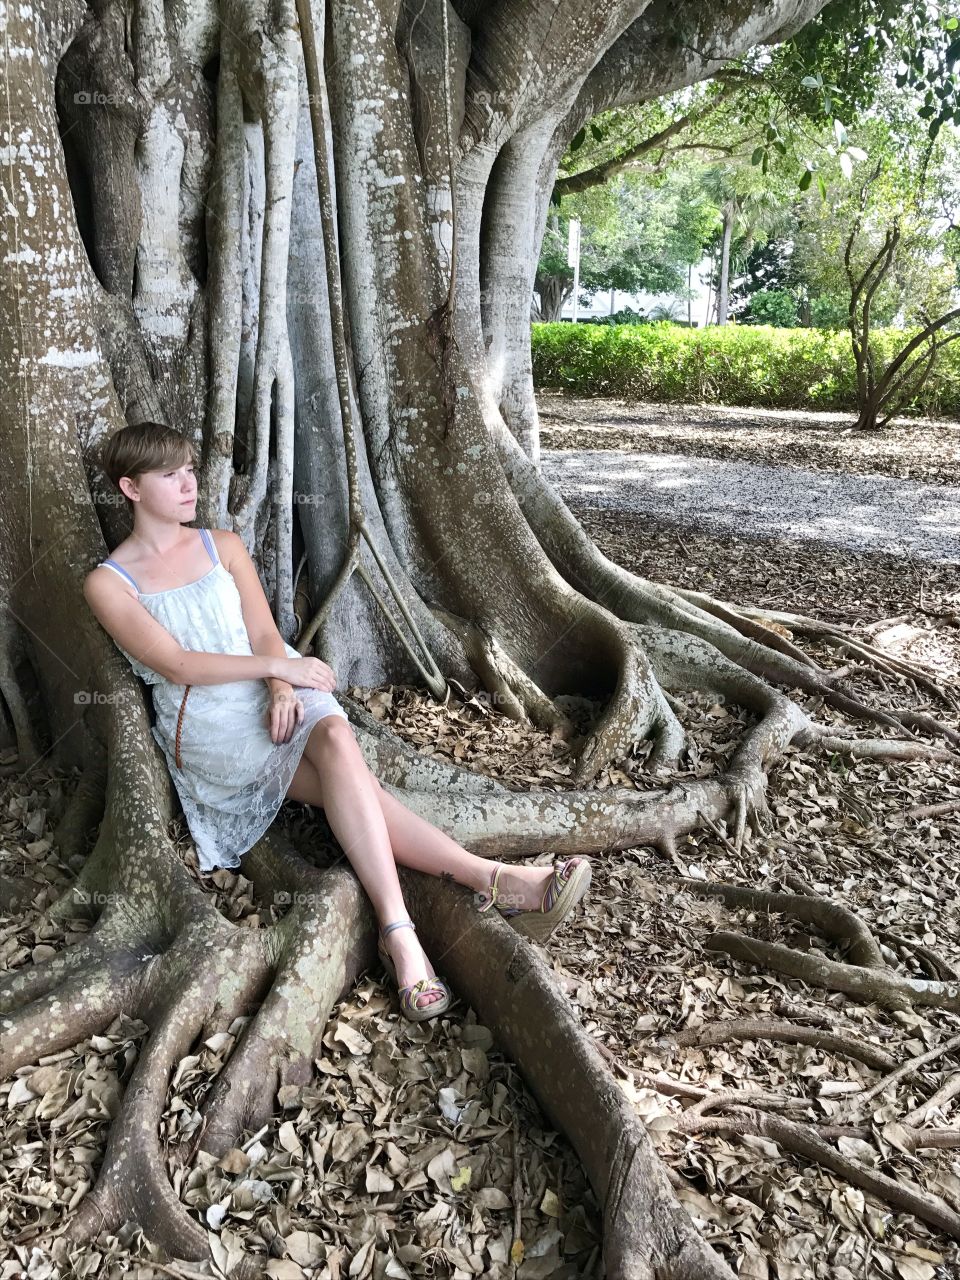 Sitting against a tree